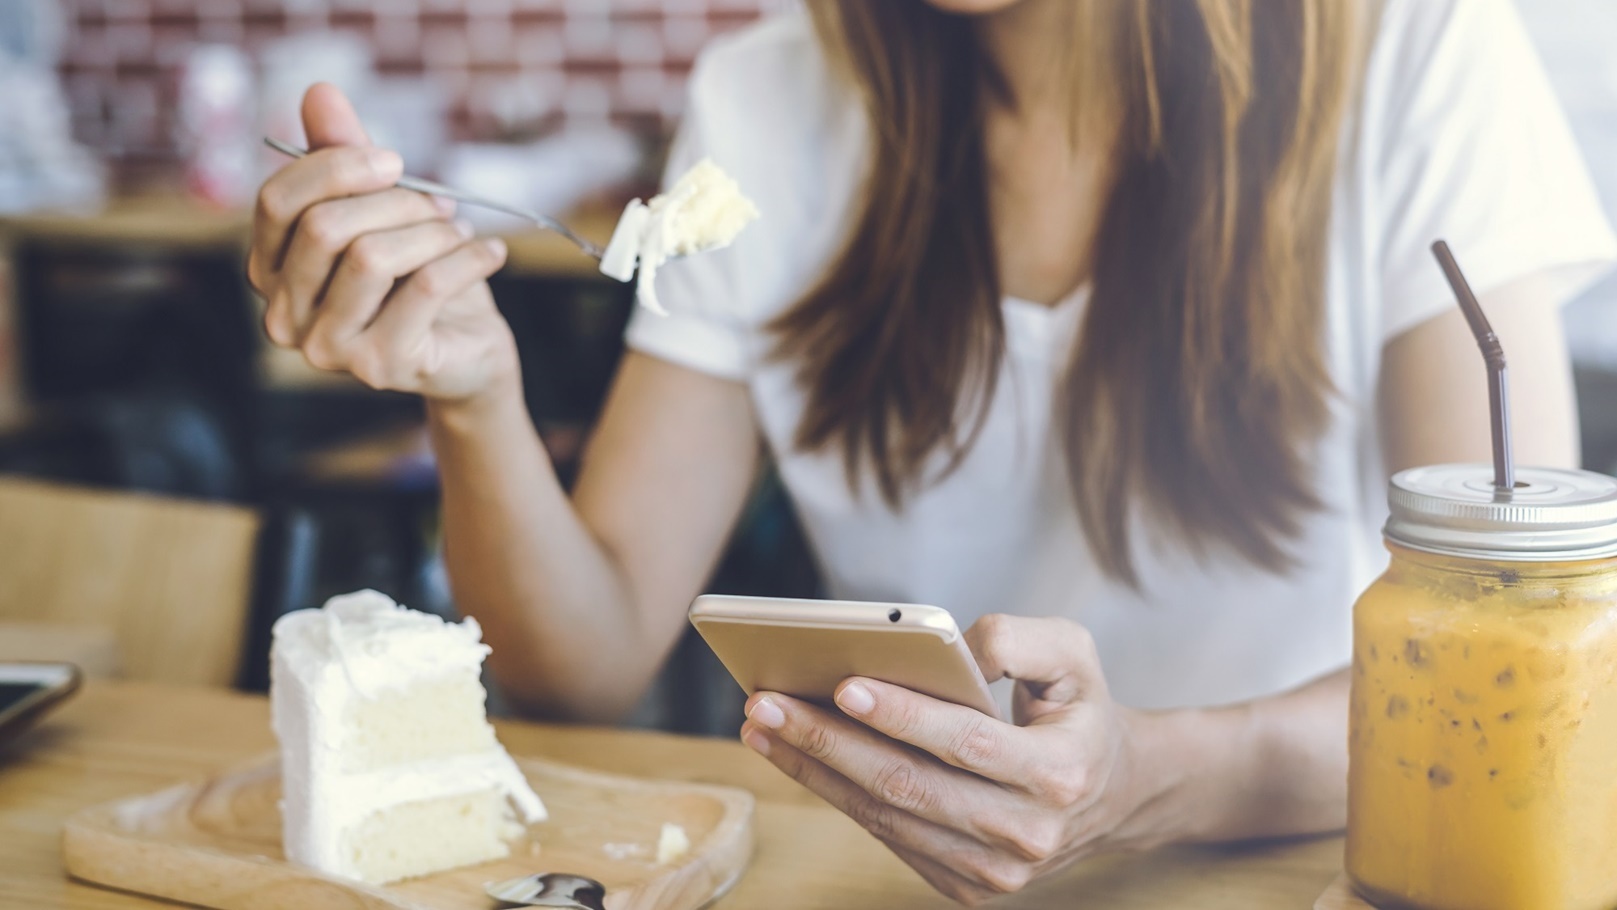 young-woman-using-smart-phone-and-eating-cake-in-c-2022-03-30-20-23-35-utc